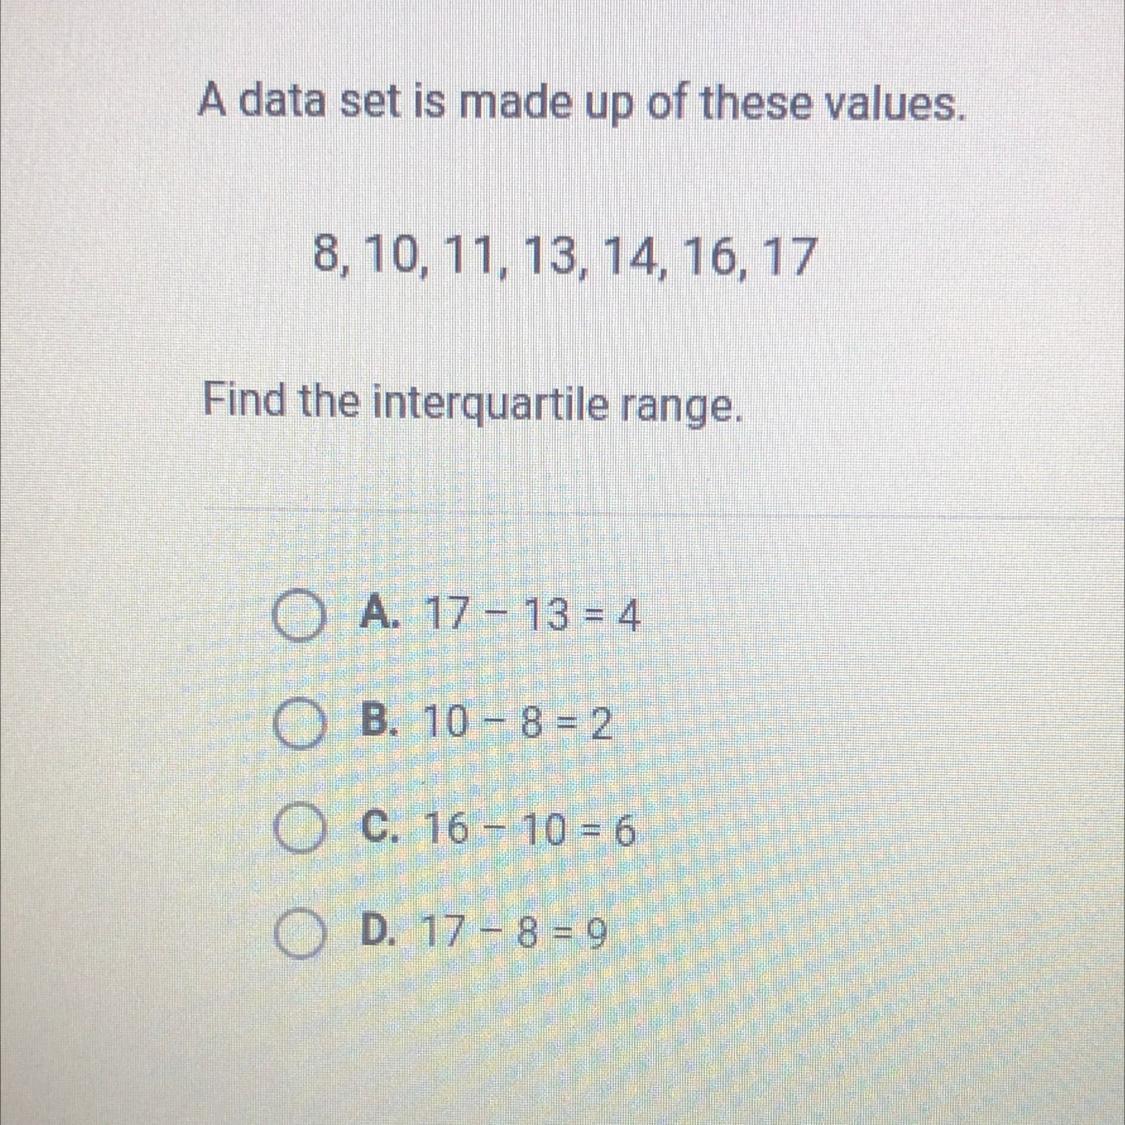 A Data Set Is Made Up Of These Values.8, 10, 11, 13, 14, 16, 17Find The Interquartile Range,O A. 17 -